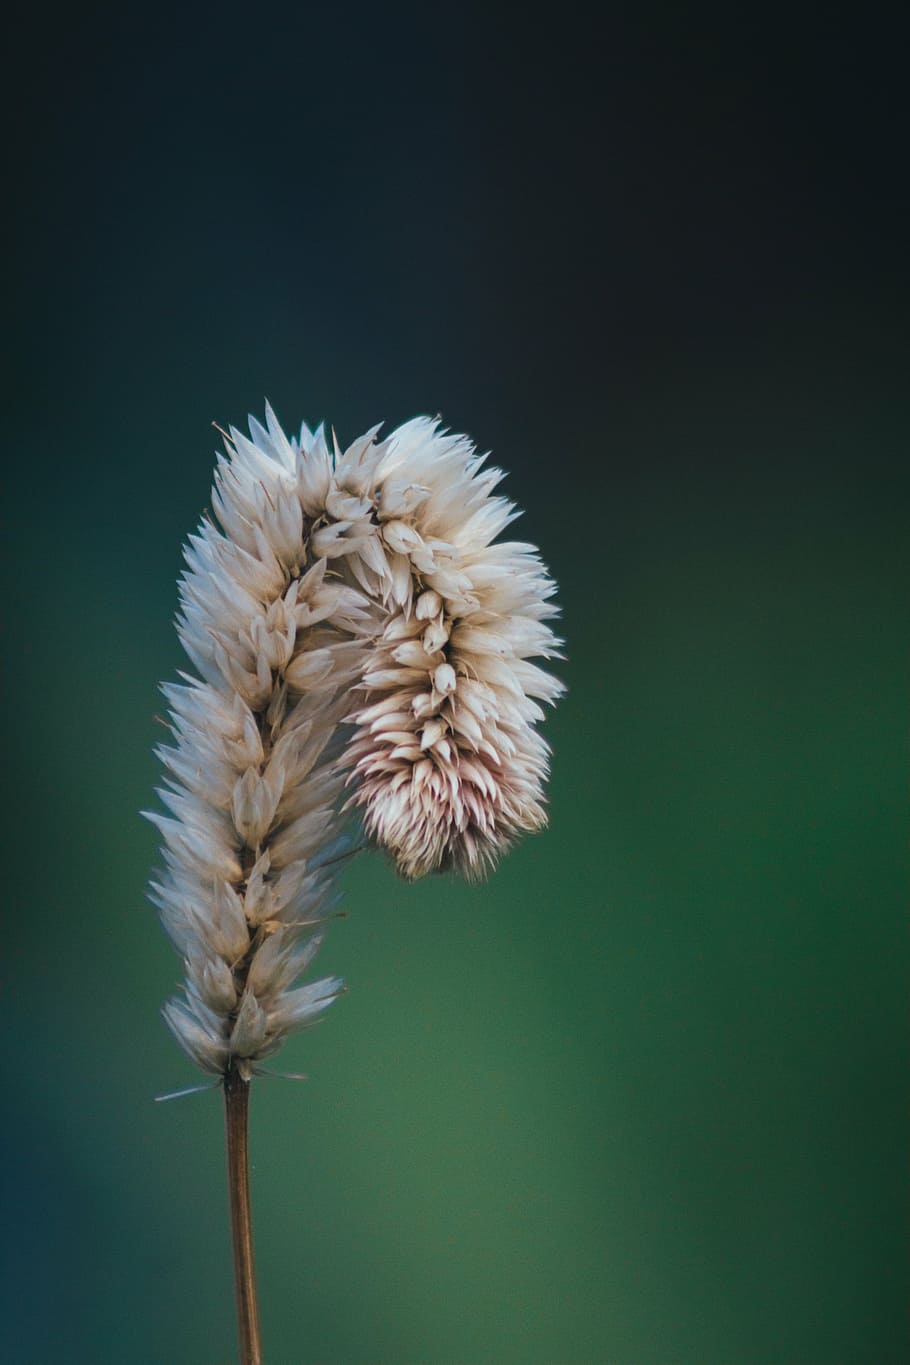 selective, focus photo, white, grass, focus, photography, flower, bud, plant, nature